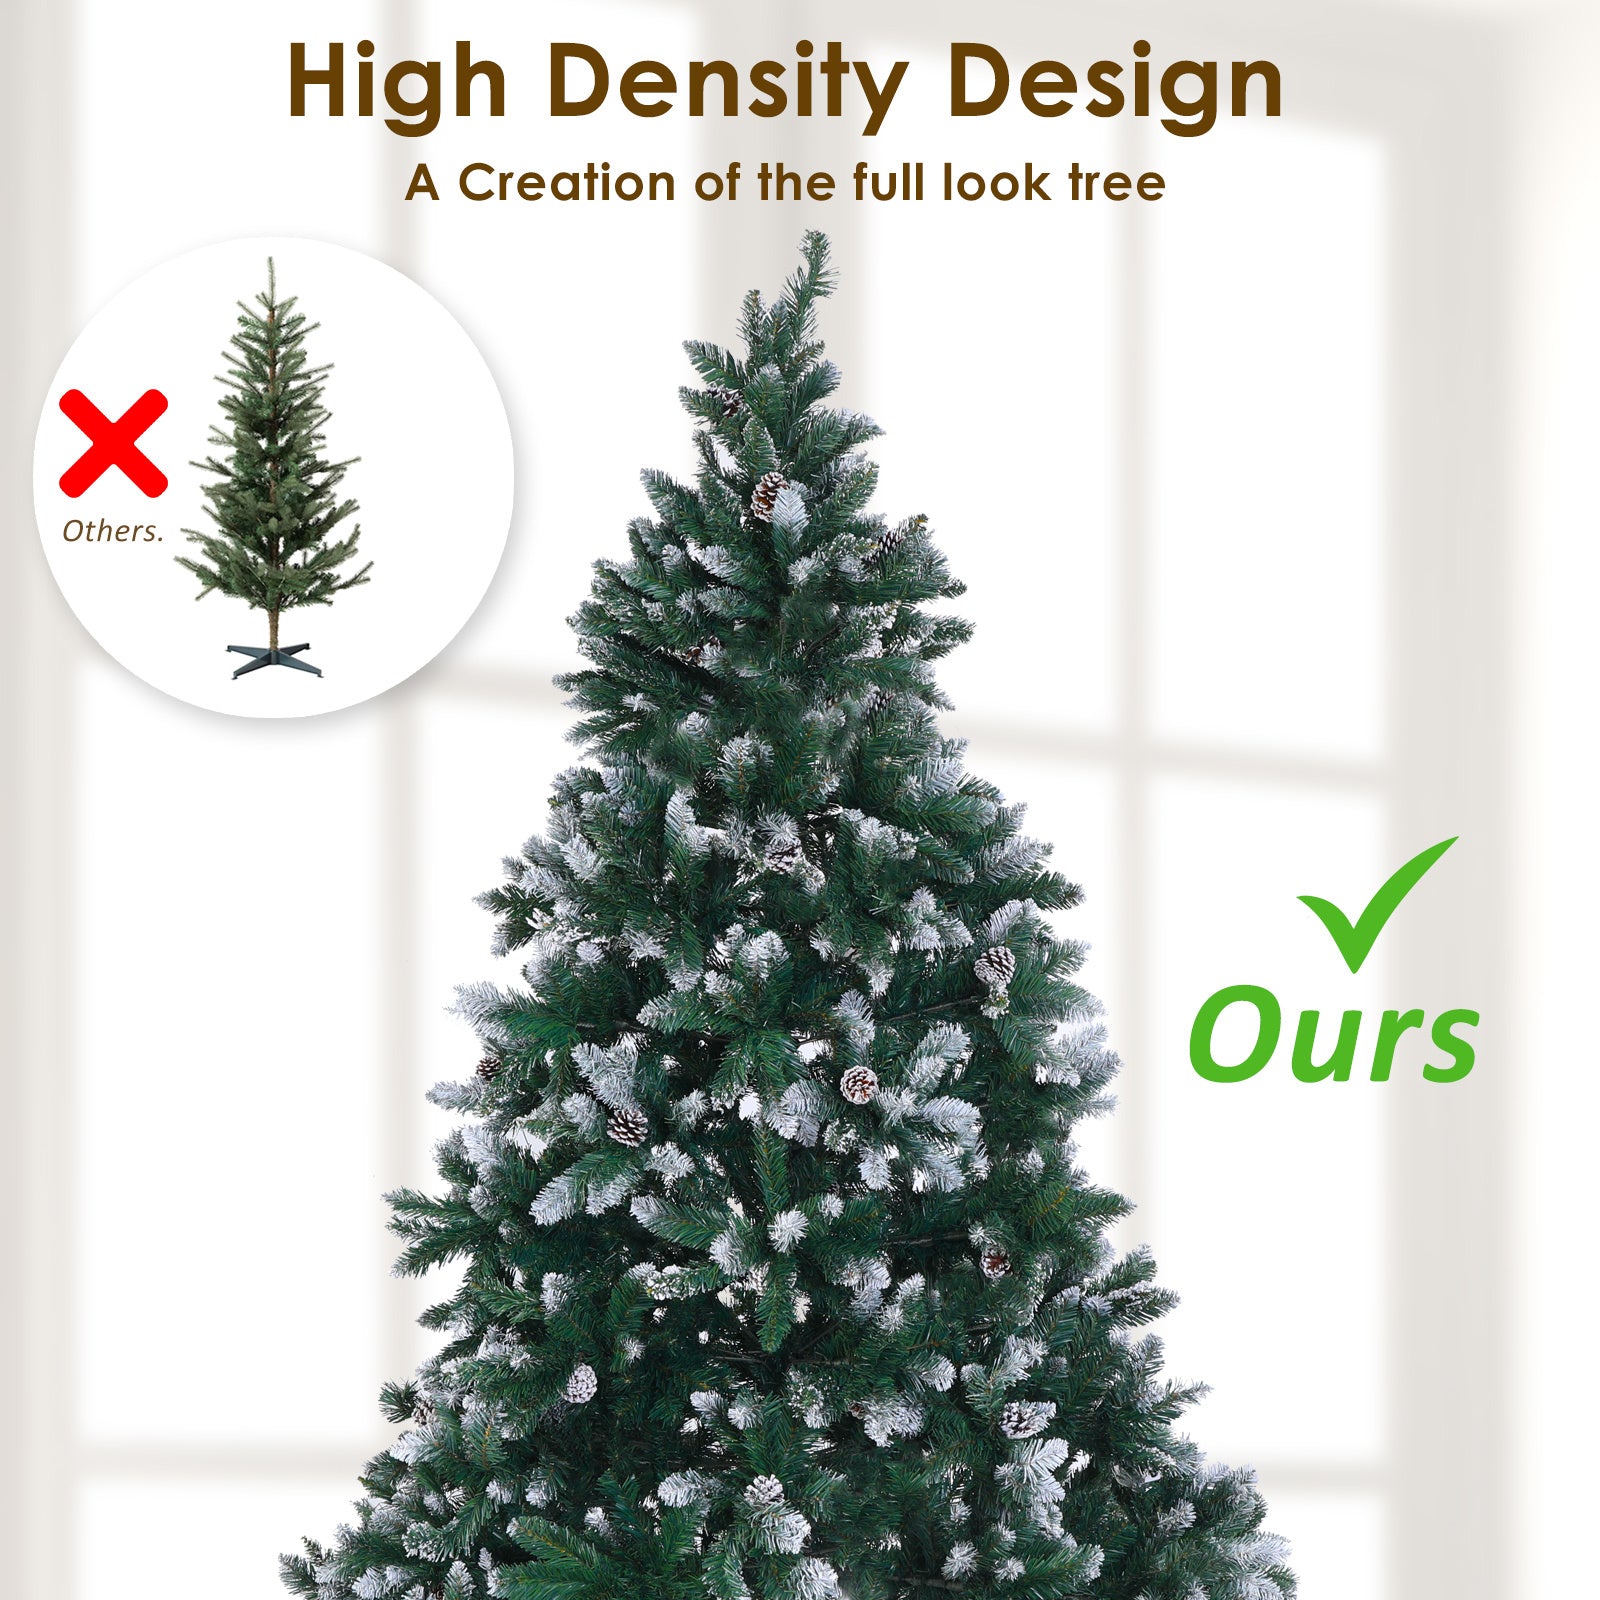 Home Ready 5Ft 150cm 720 tips Green Snowy Christmas Tree Xmas Pine Cones Deals499